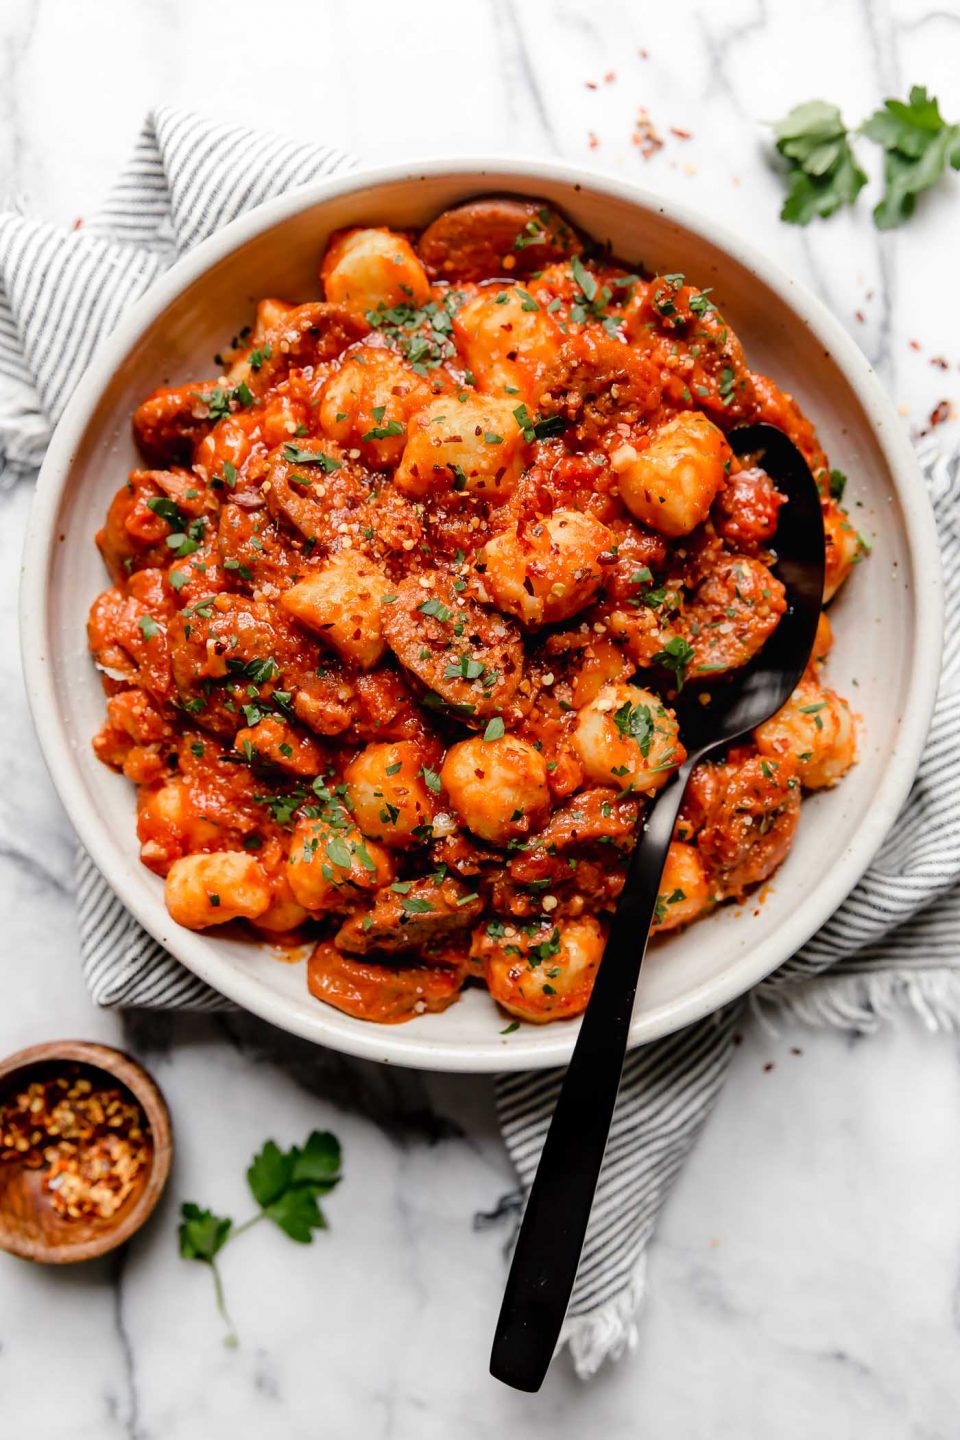 Gnocchi in Amatriciana sauce with Italian sausage. Served in a large white ceramic bowl with a large black serving spoon, sitting on a white marble surface surrounded by fresh parsley.